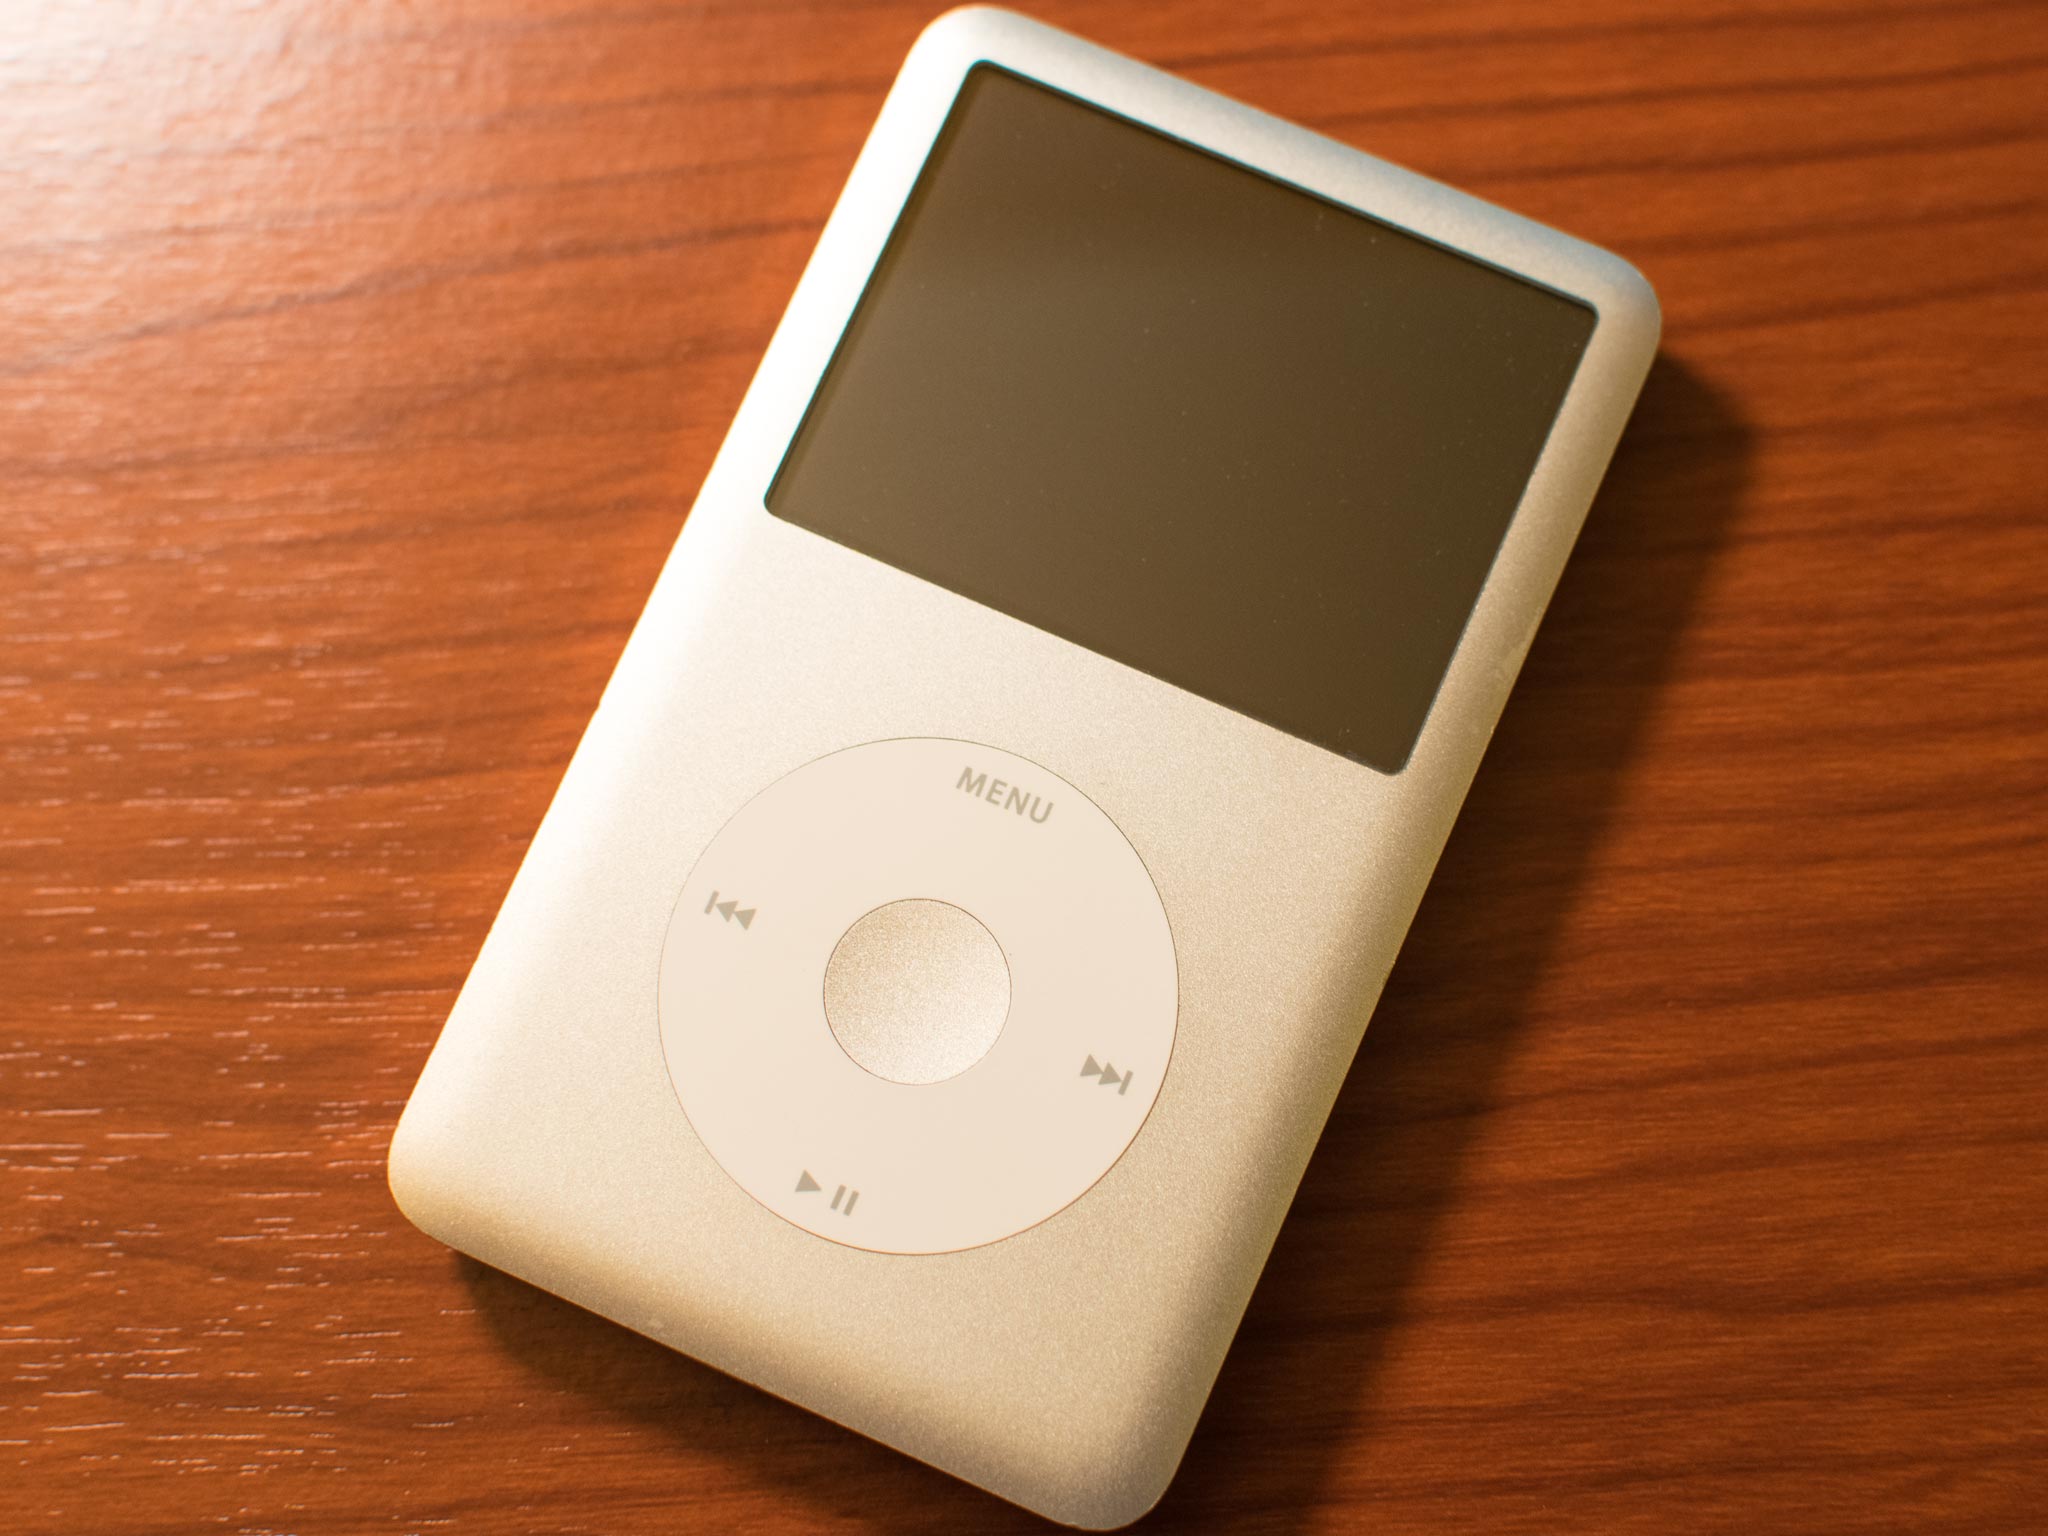 Watch as someone adds 1TB of flash storage to an iPod Classic. And